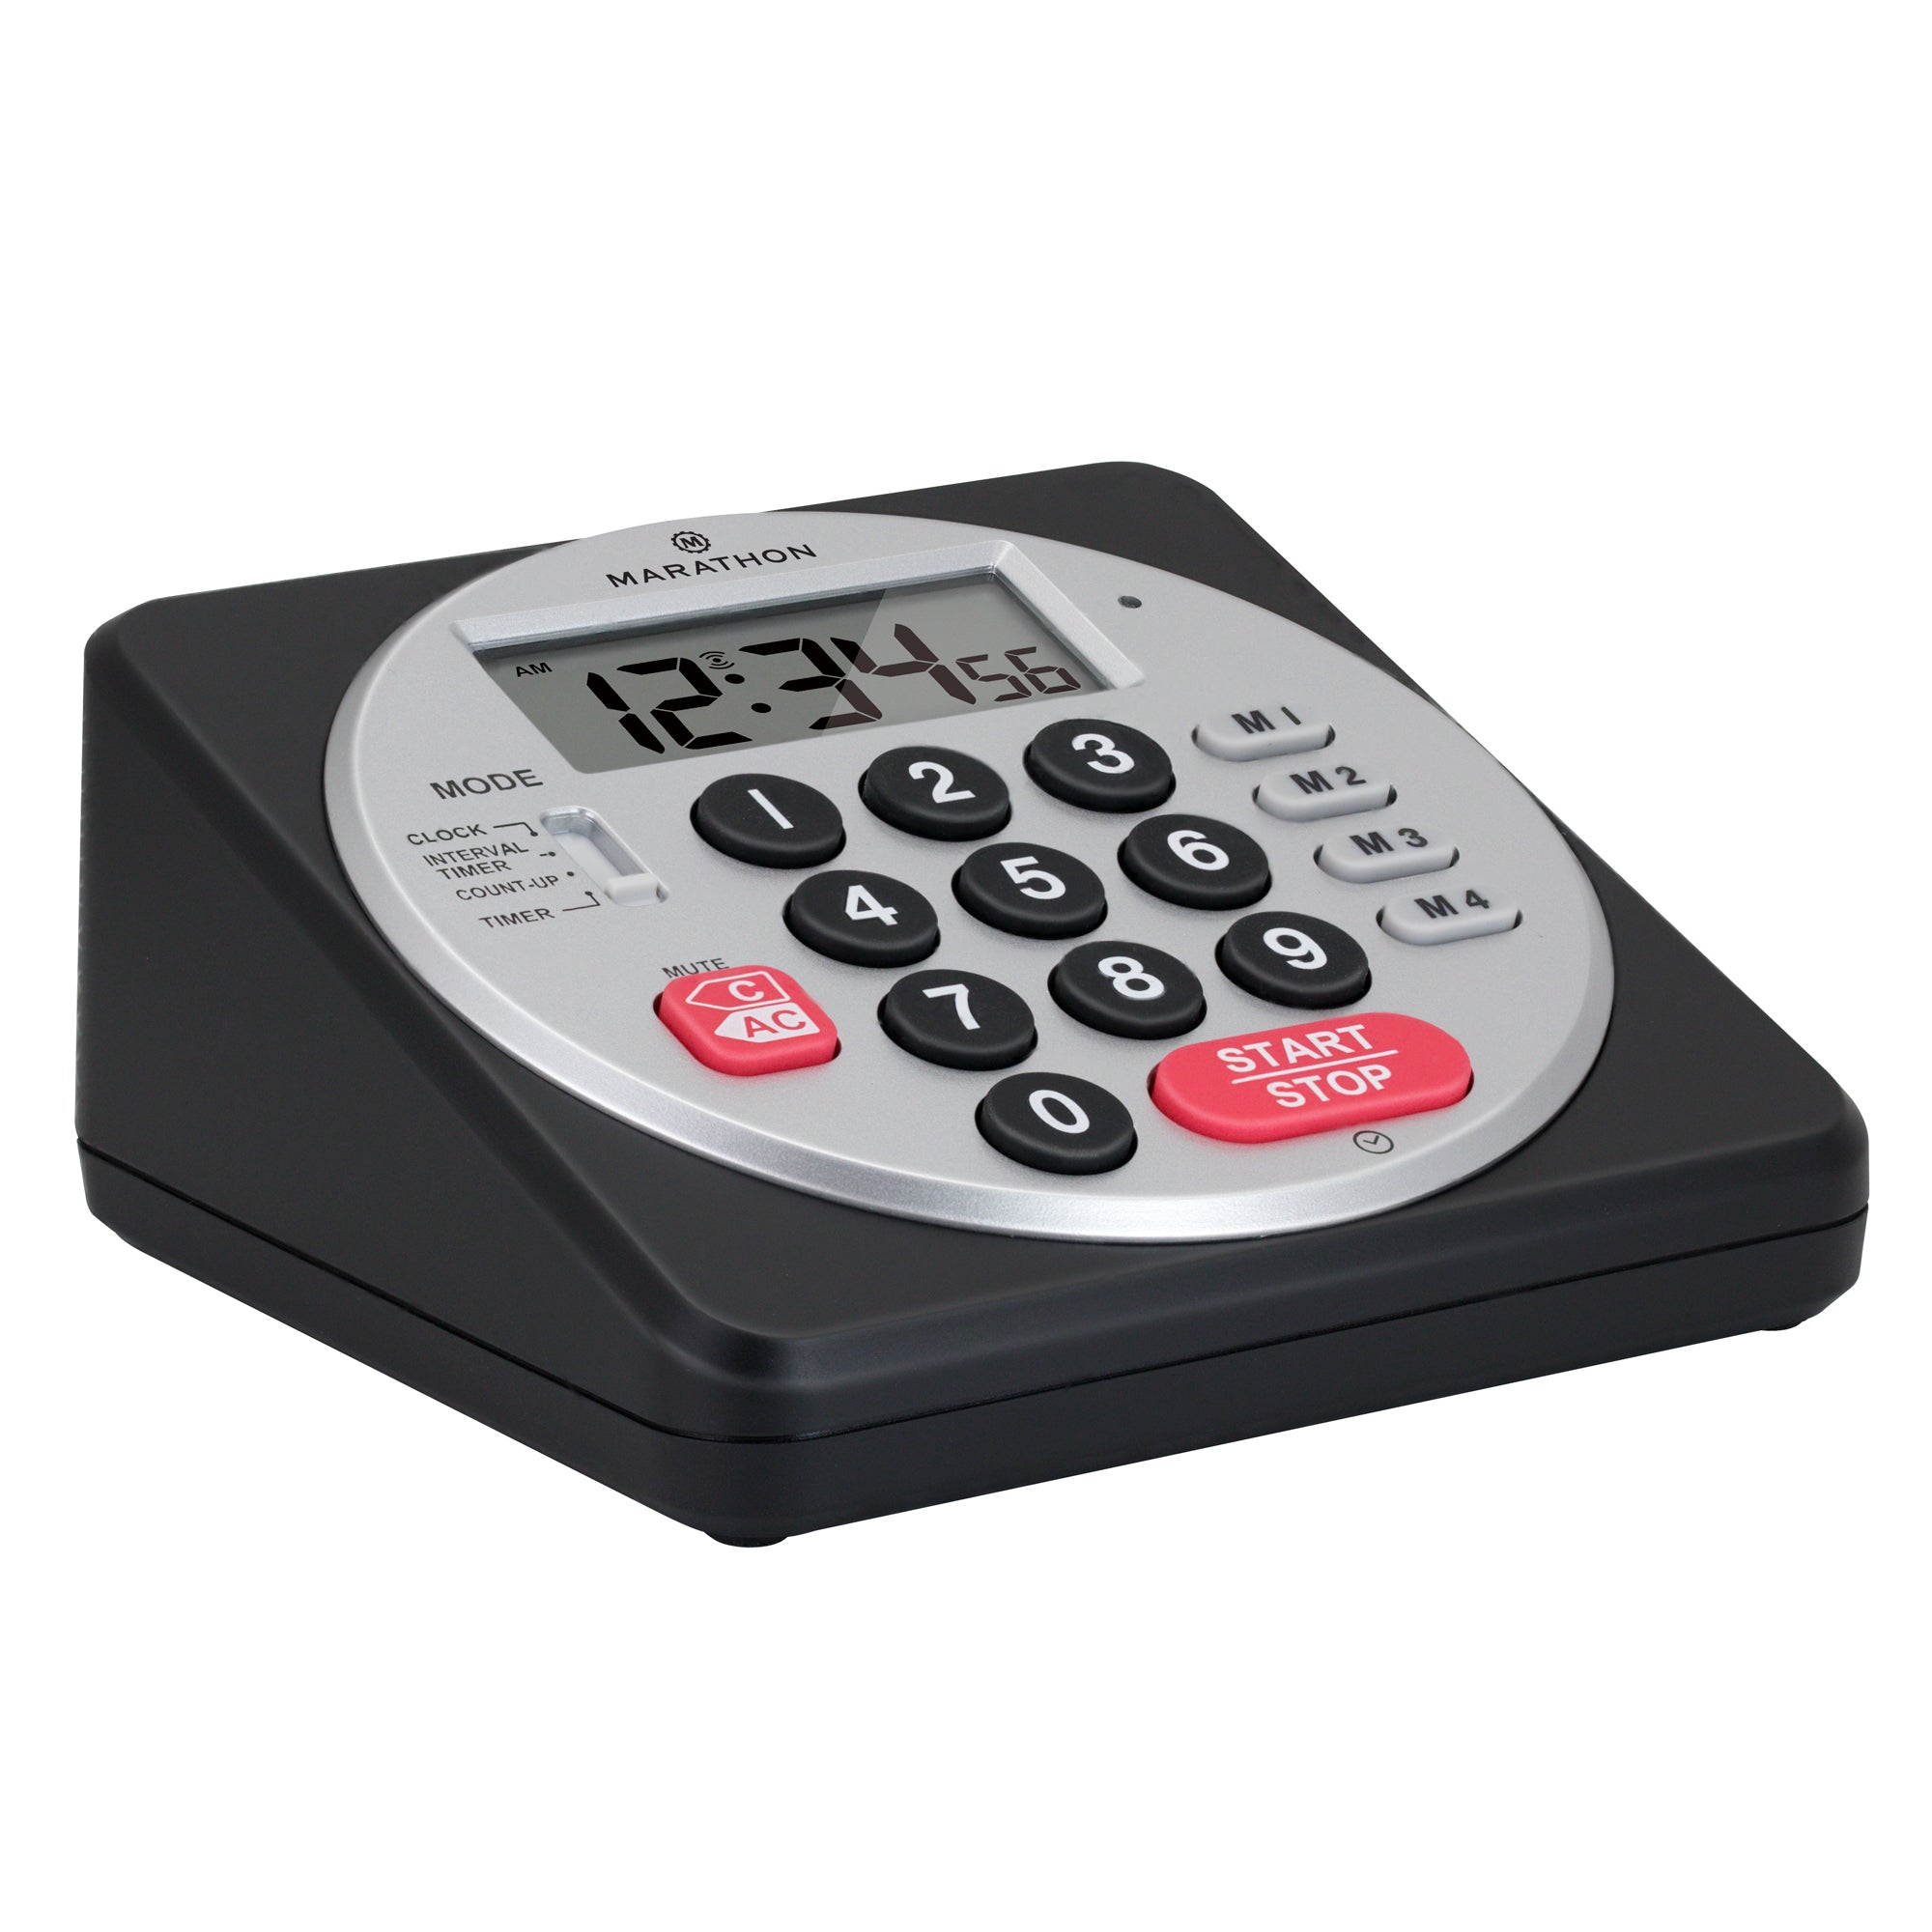 Commercial Grade Direct Entry 100-Hour Keypad Digital Timer with Loud Ring, Interval Countdown, Count-up and Clock Feature - marathonwatch